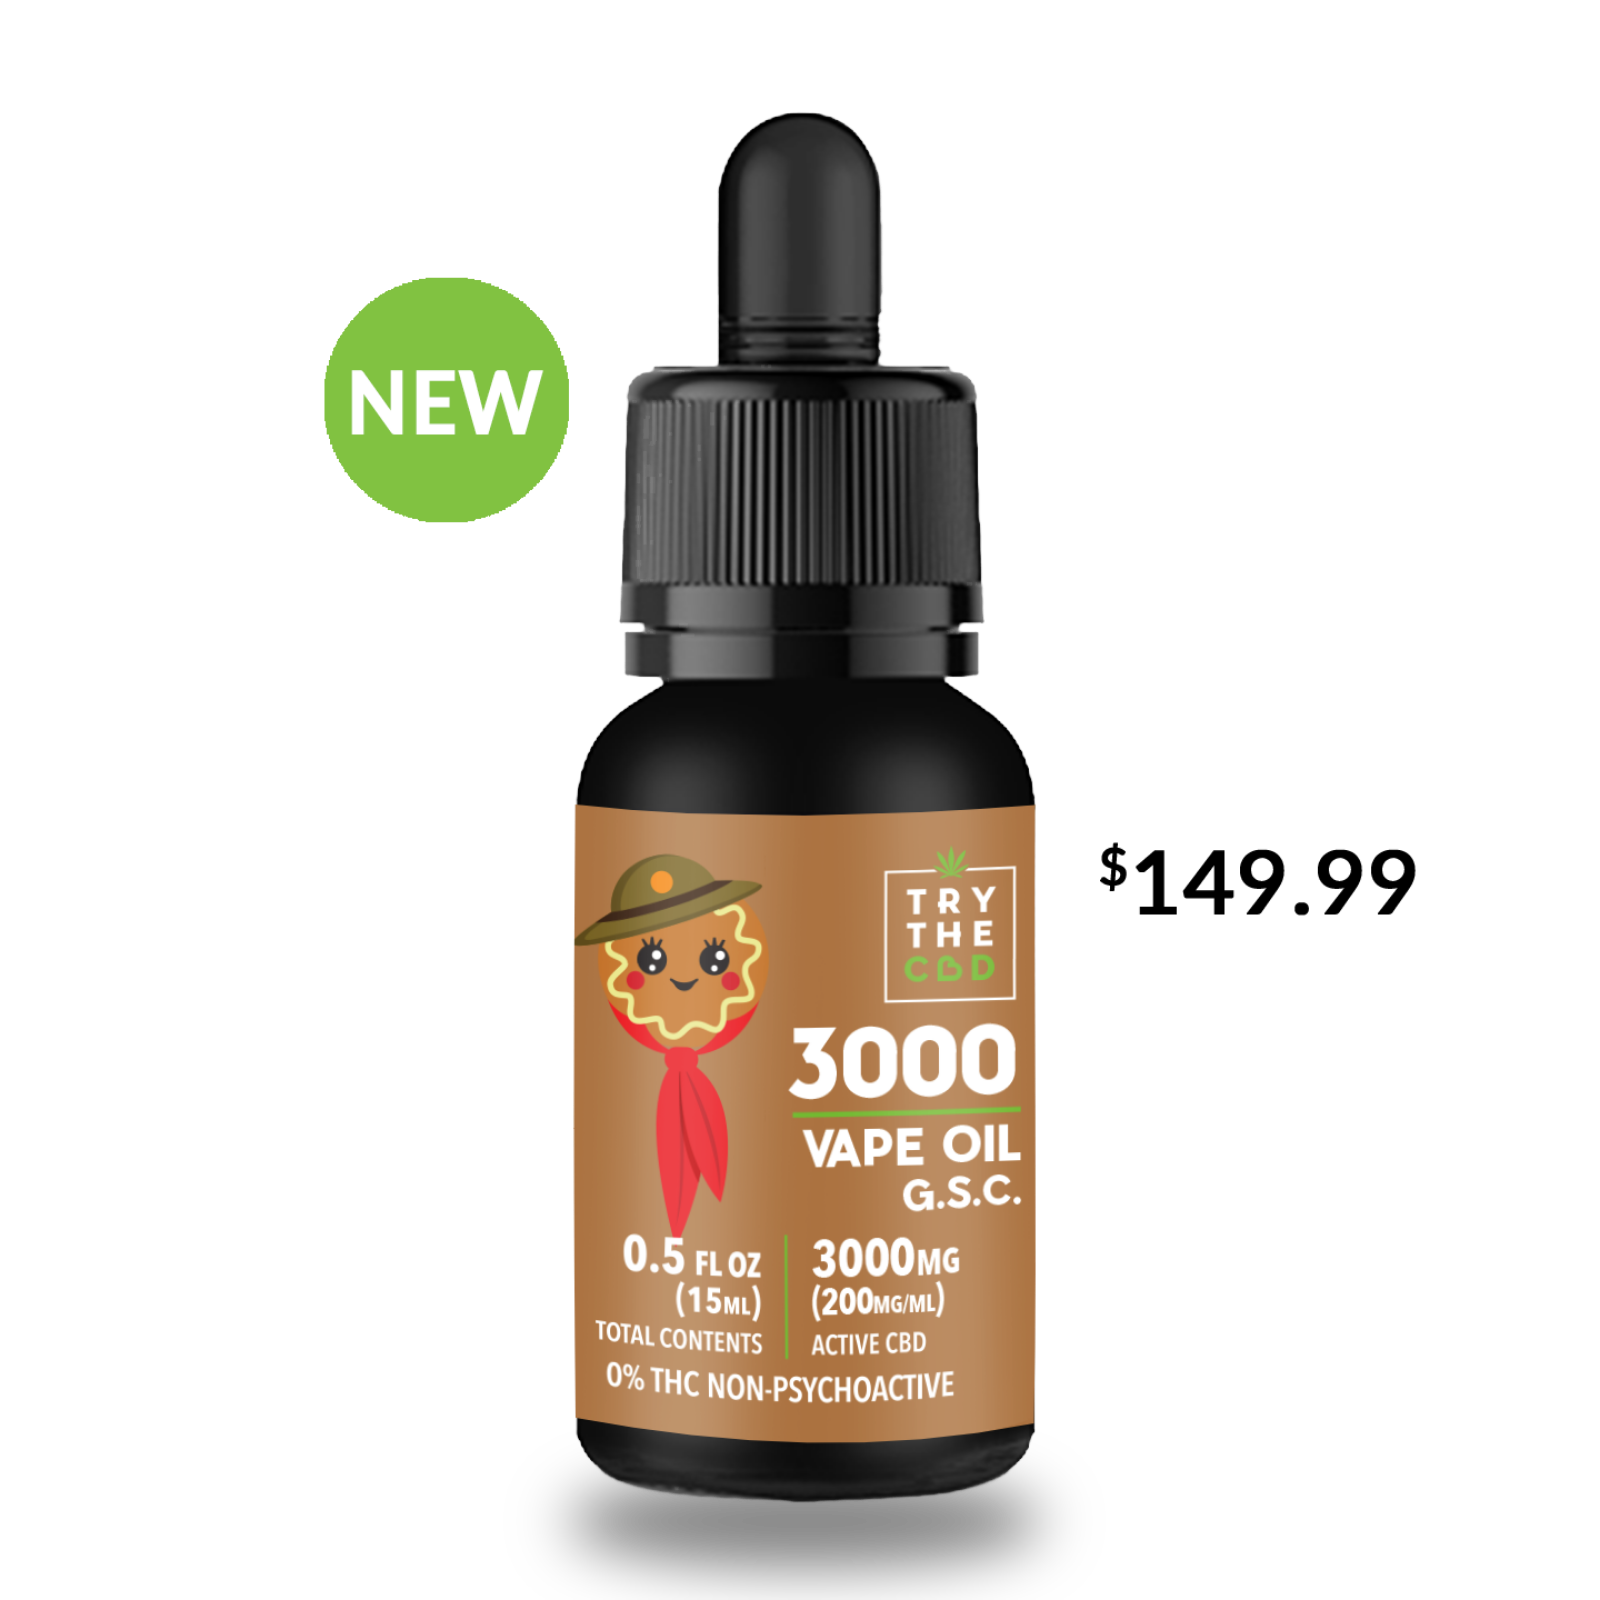 GSC (f.k.a. Girl Scout Cookies) 3000MG CBD Vape Oil | Leafly